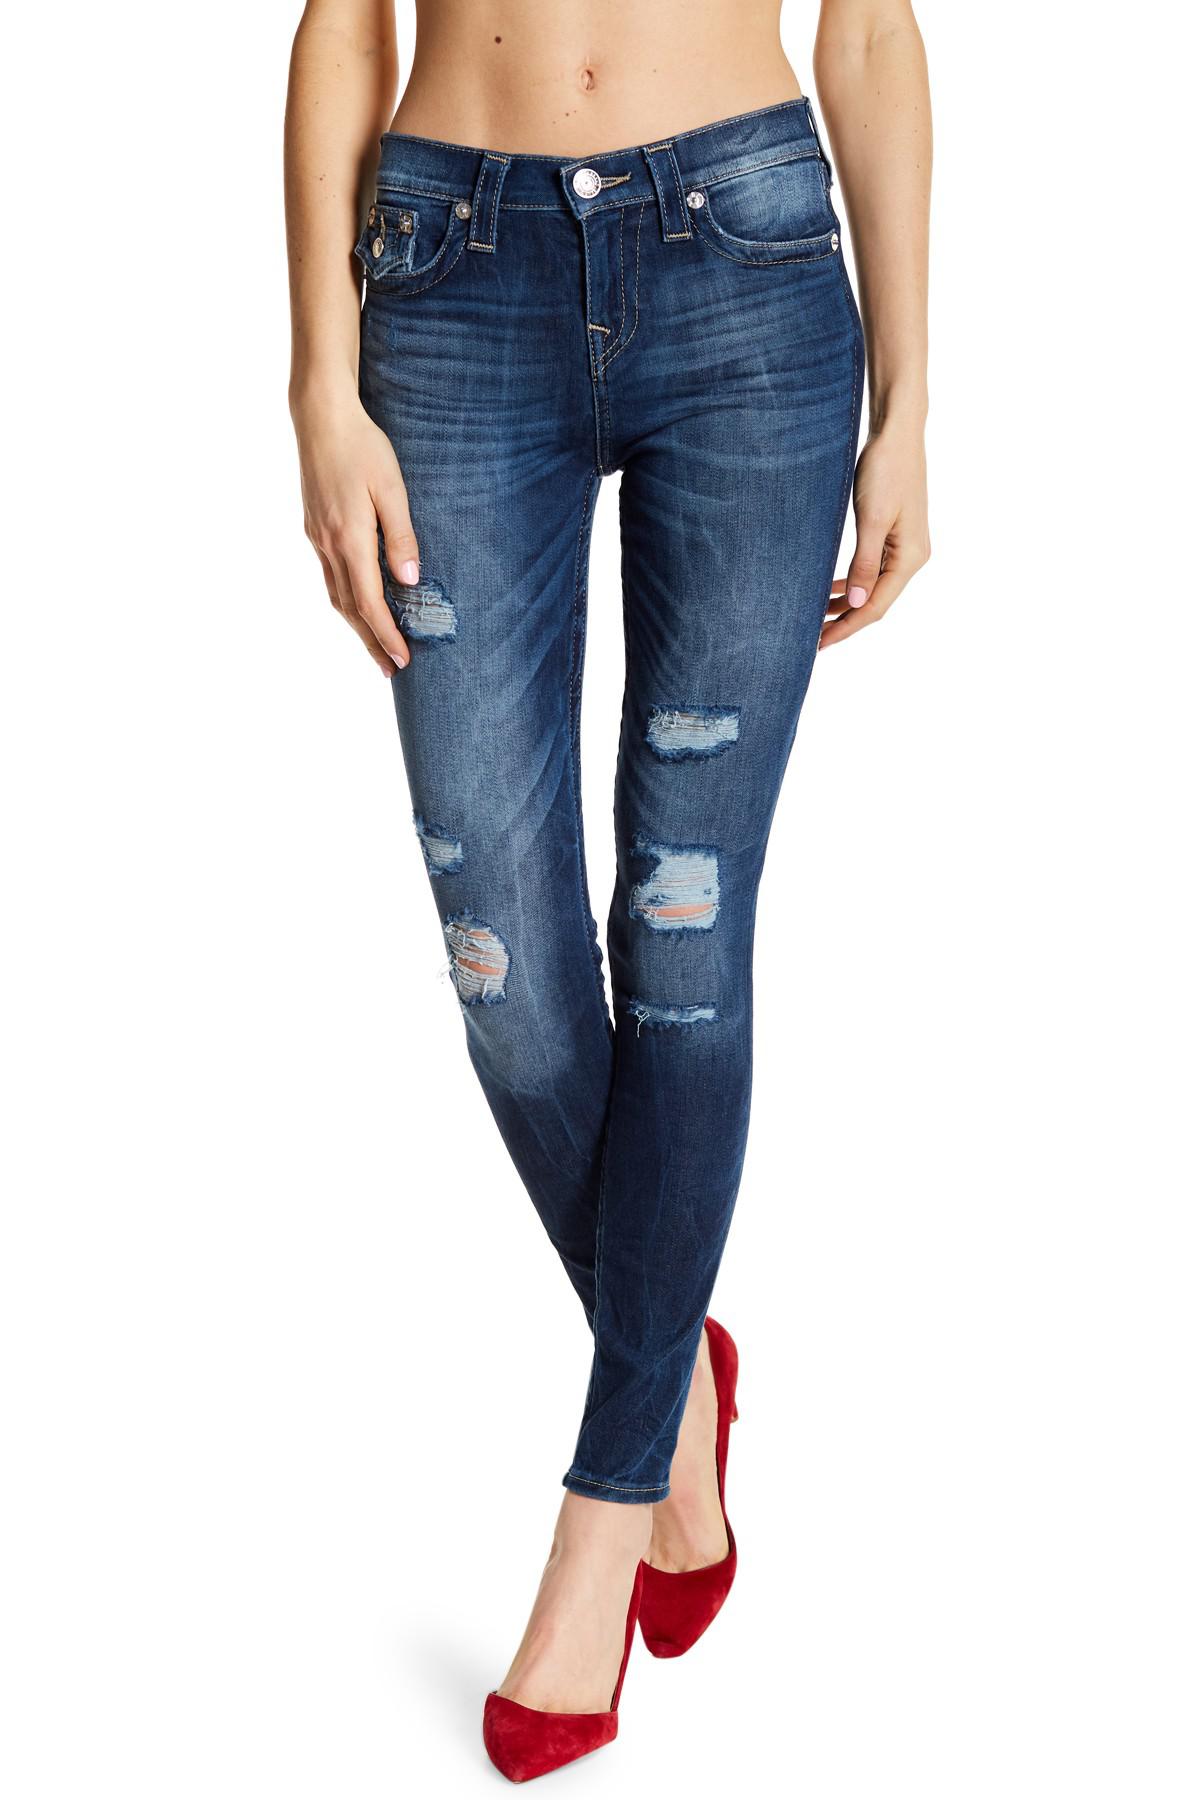 Lyst - True Religion High Rise Super Skinny Jeans in Blue